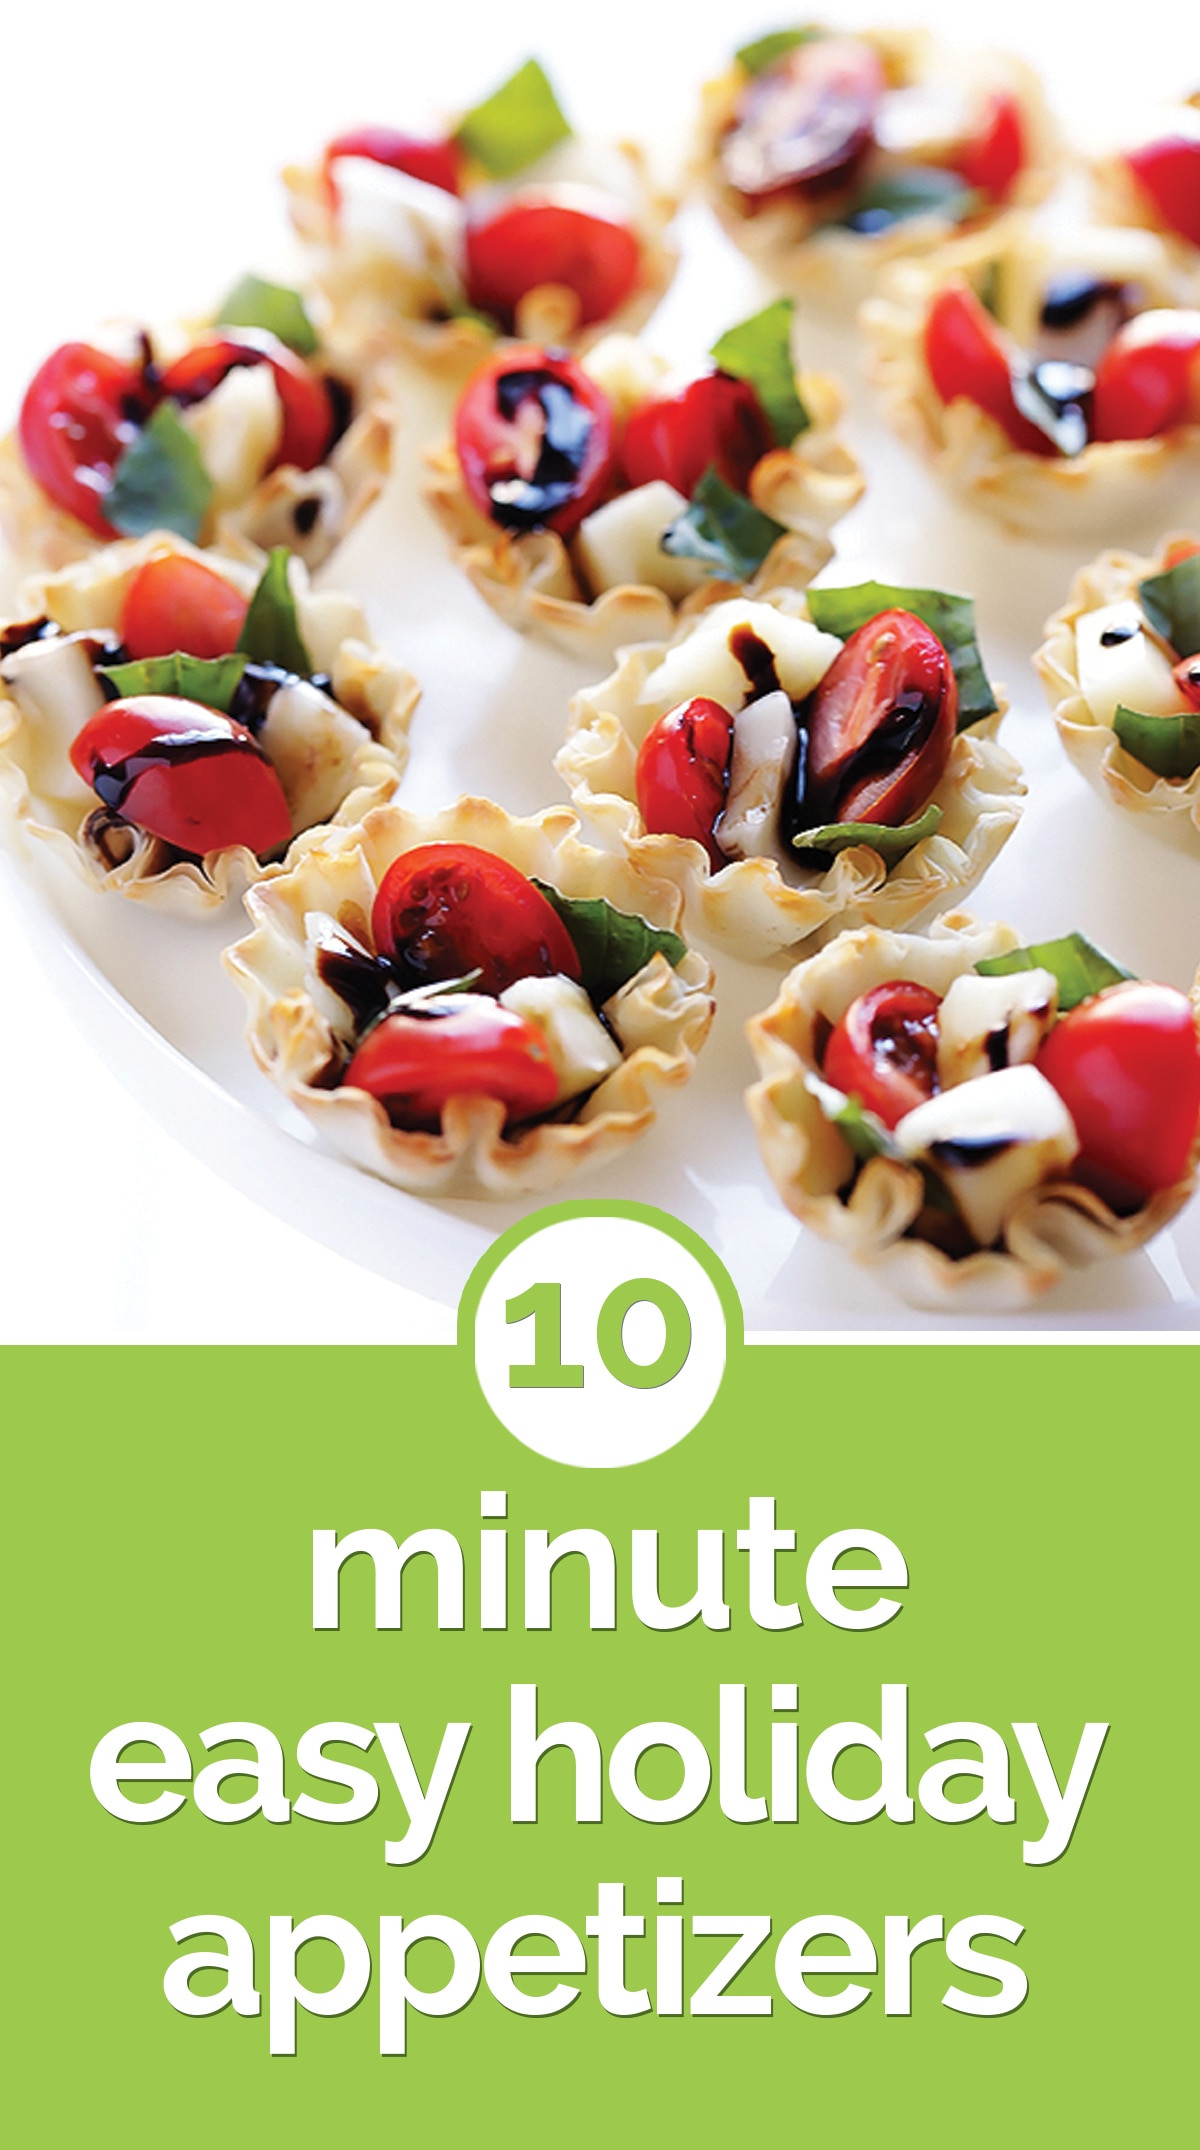 Easy Appetizers For Christmas
 10 Minute Easy Holiday Appetizers thegoodstuff